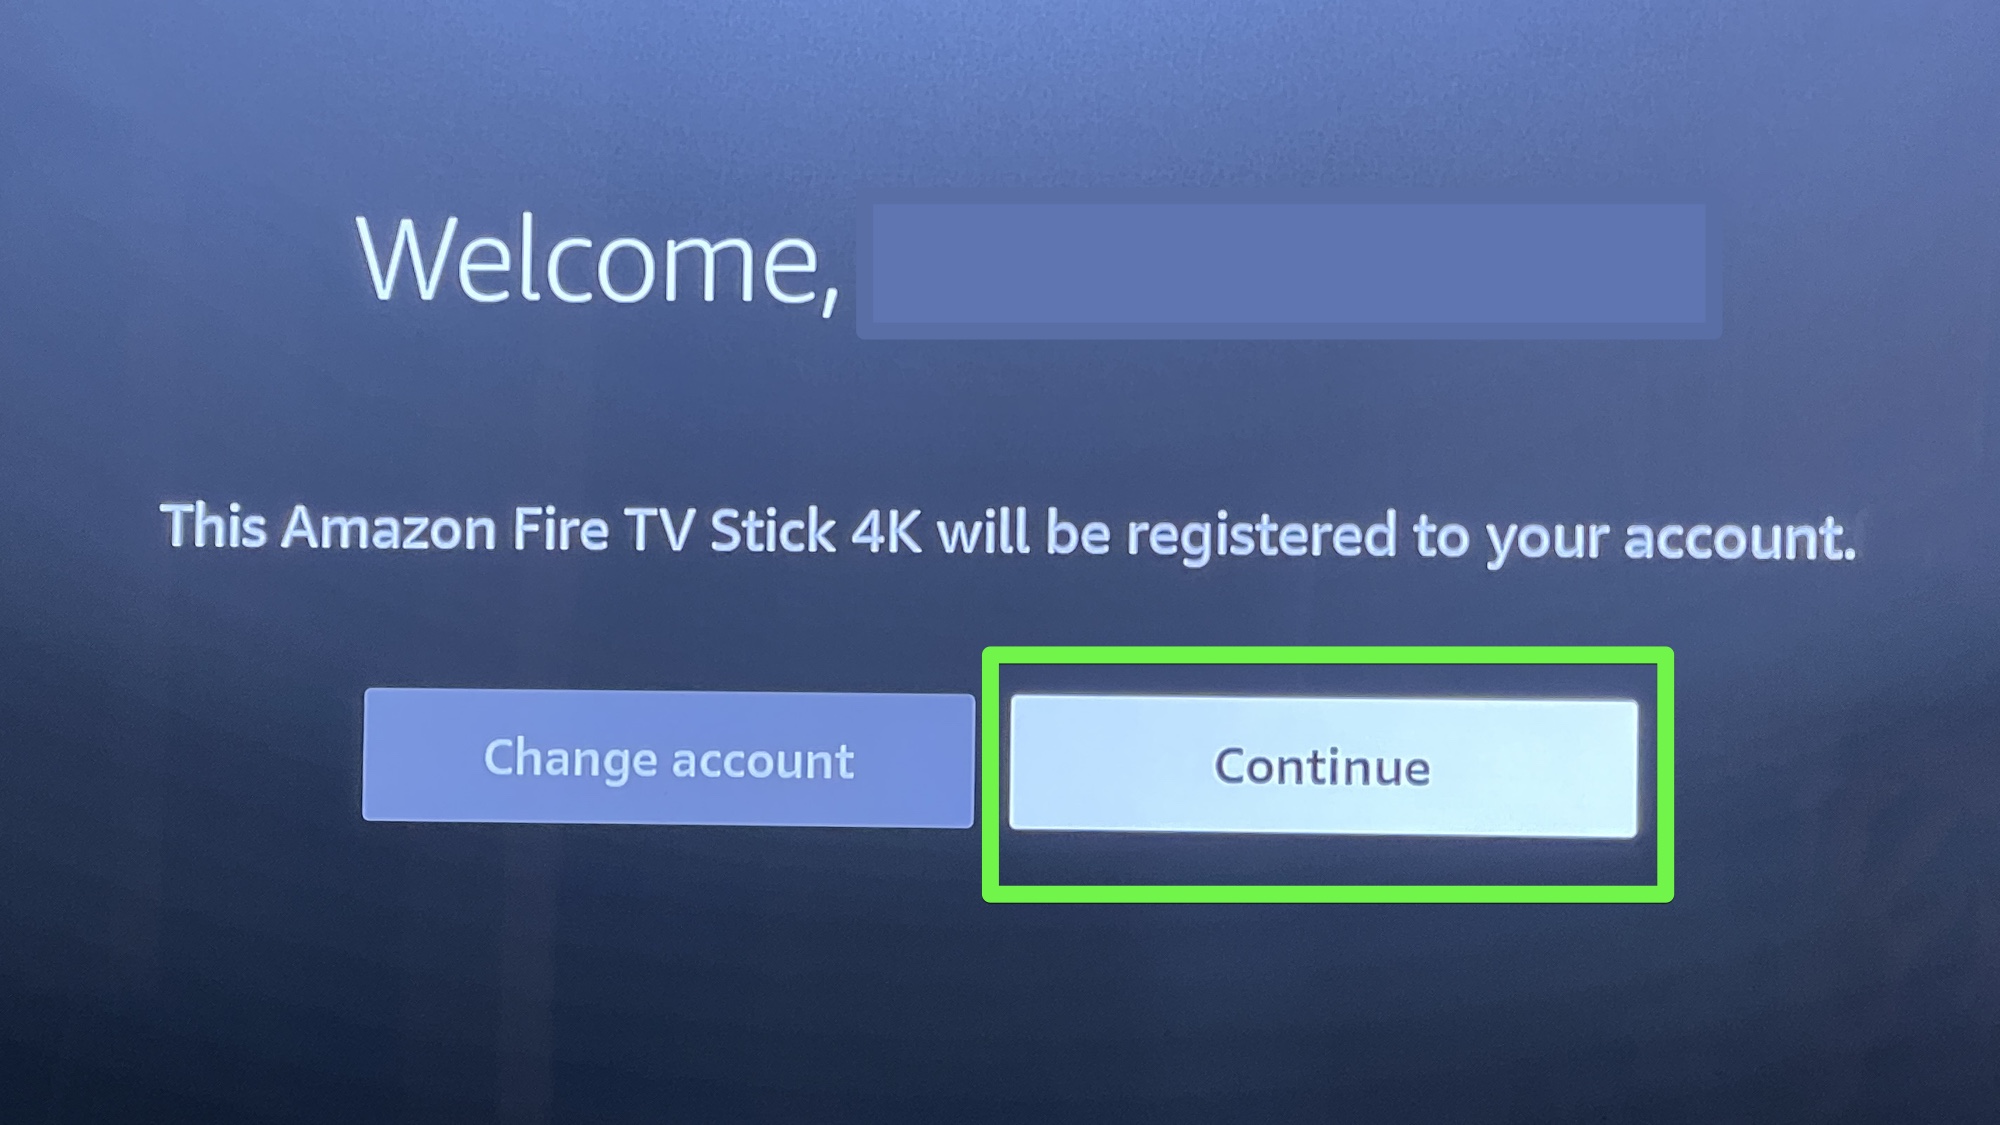 the fire tv setup screen asking to proceed to log into your account by clicking continue